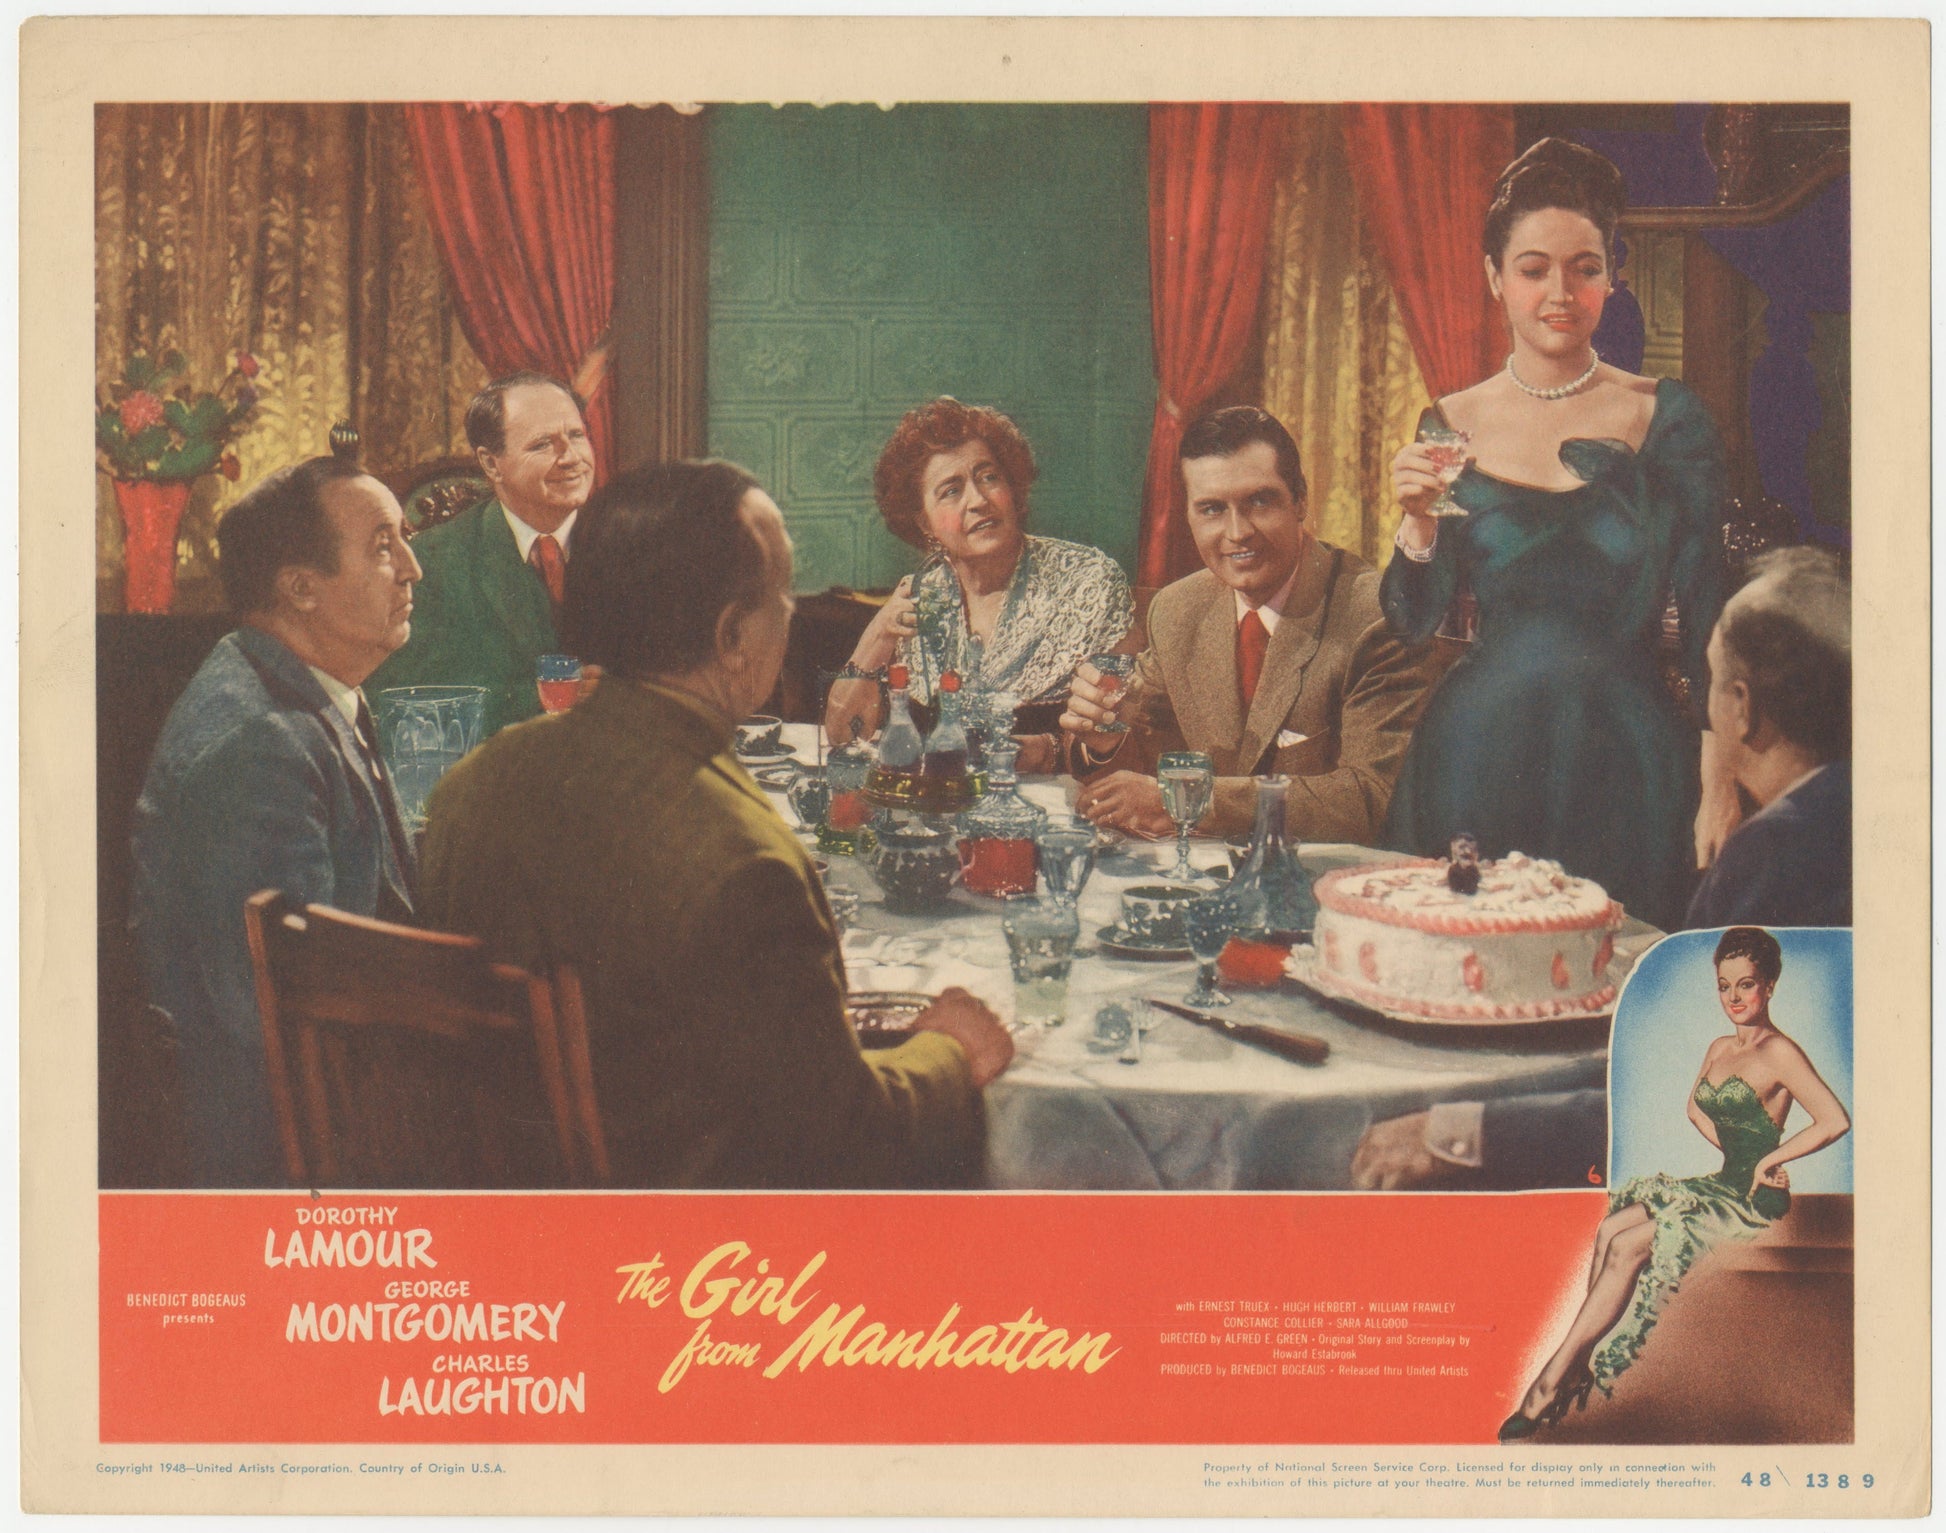 The Girl From Manhattan US Lobby Card (1948) - ORIGINAL RELEASE - posterpalace.com